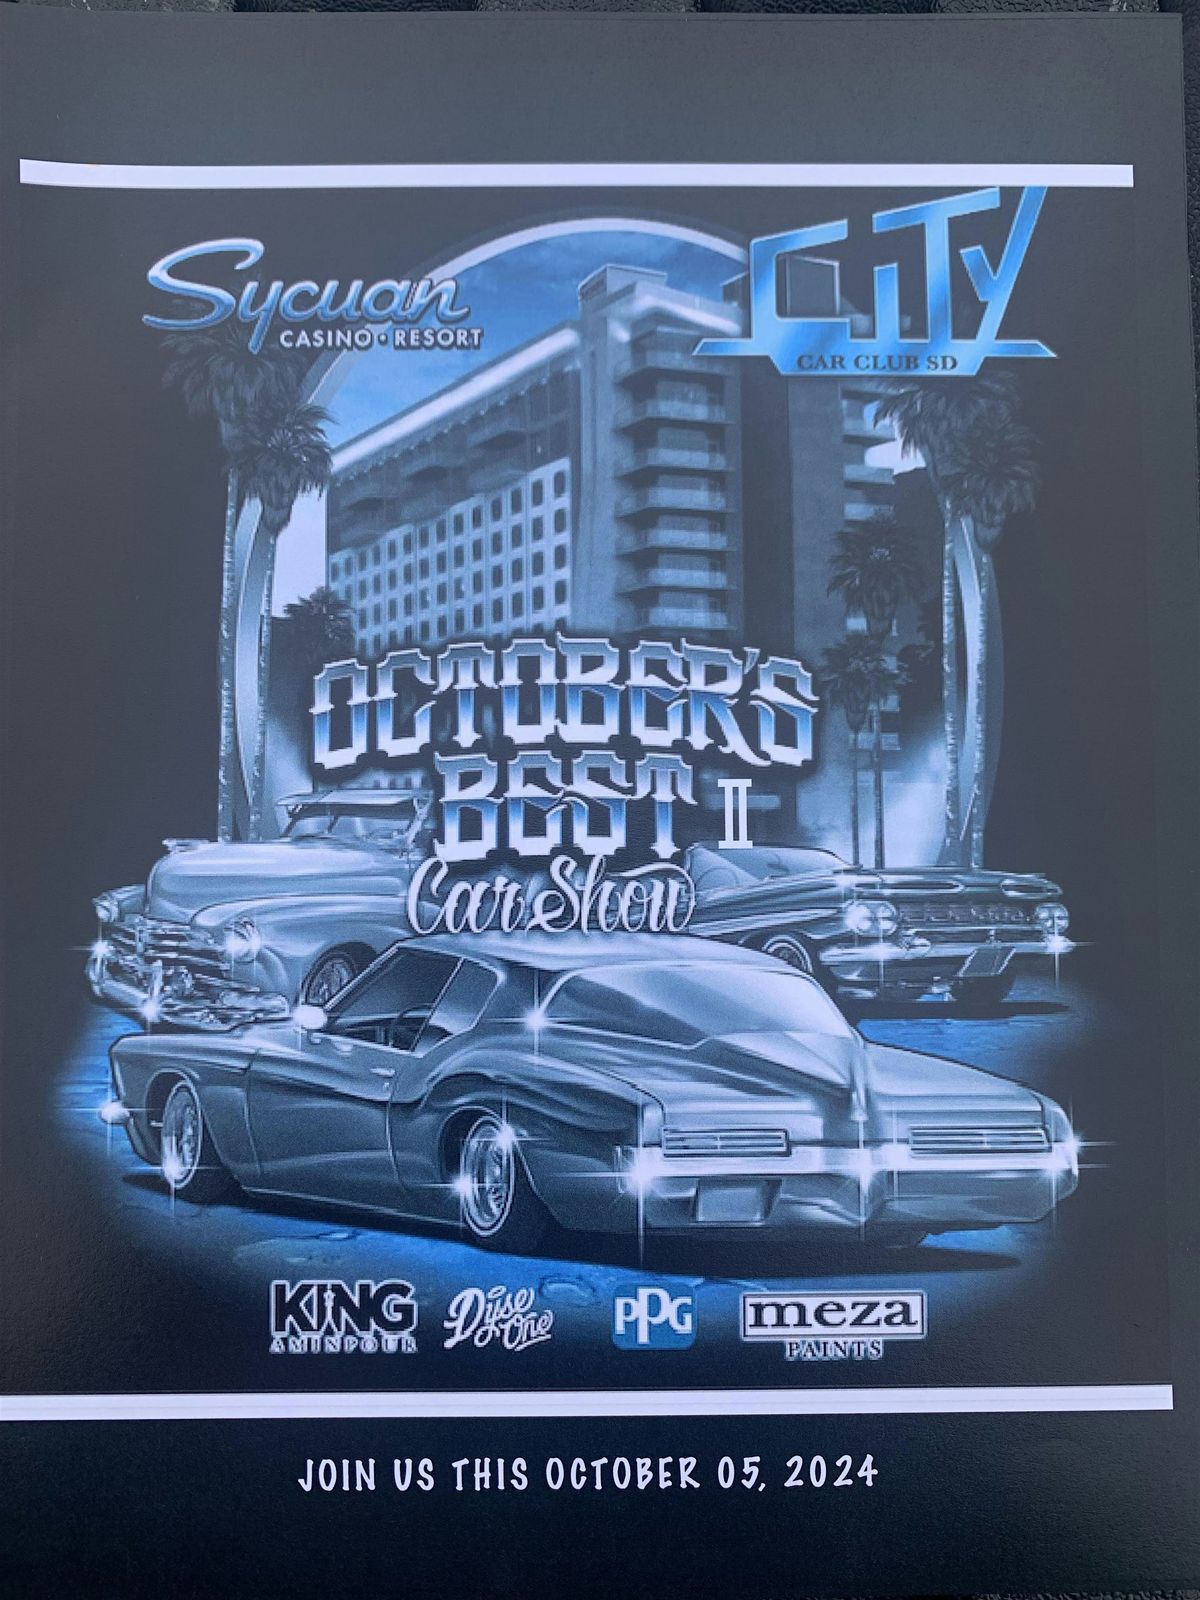 City Car Club San Diego and Sycuan Casino Resort October's Best II Car Show